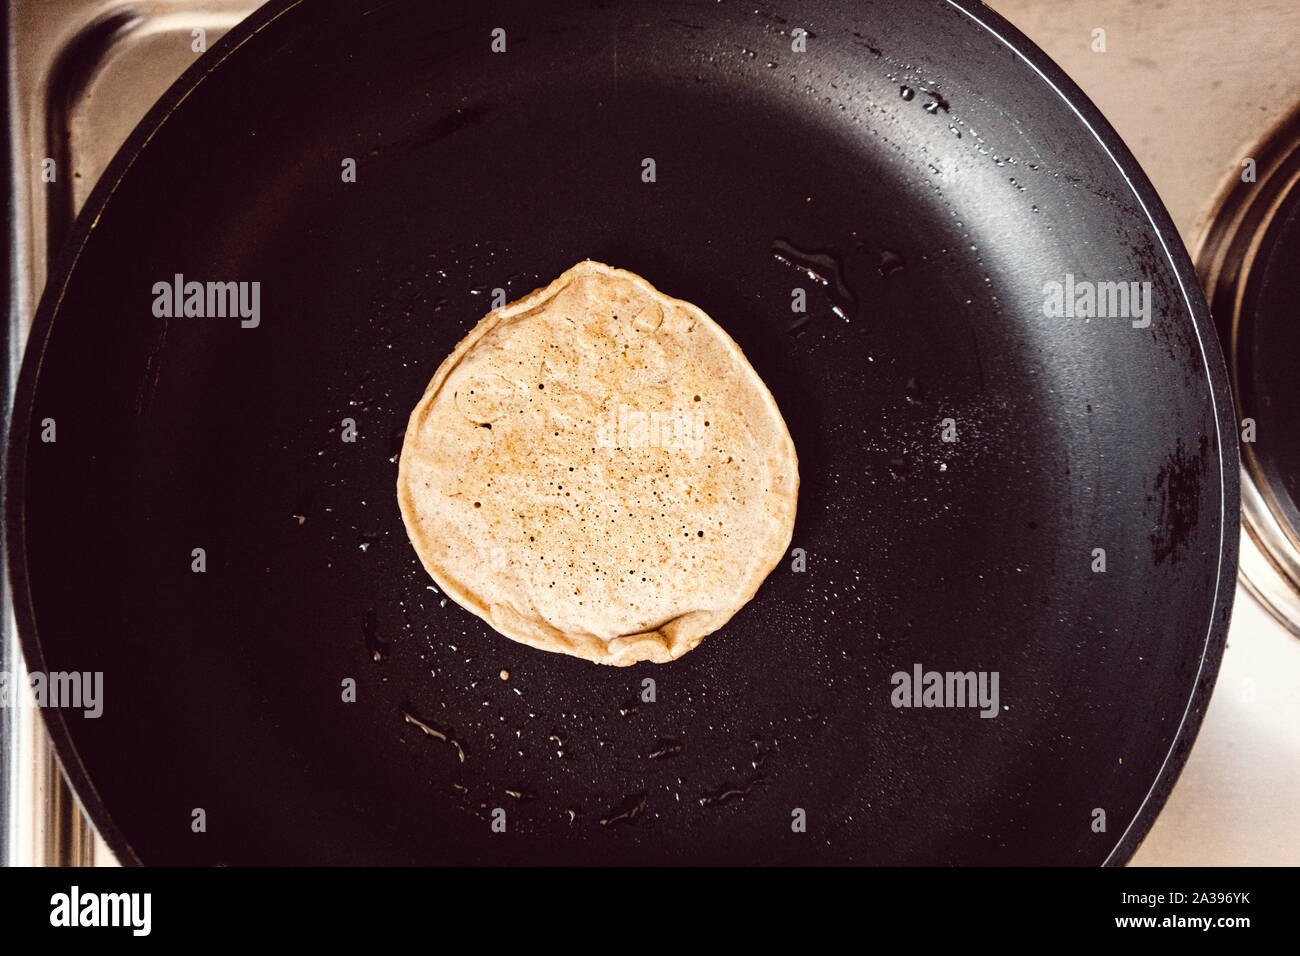 Pancake cooking in a black pan in a kitchen Stock Photo